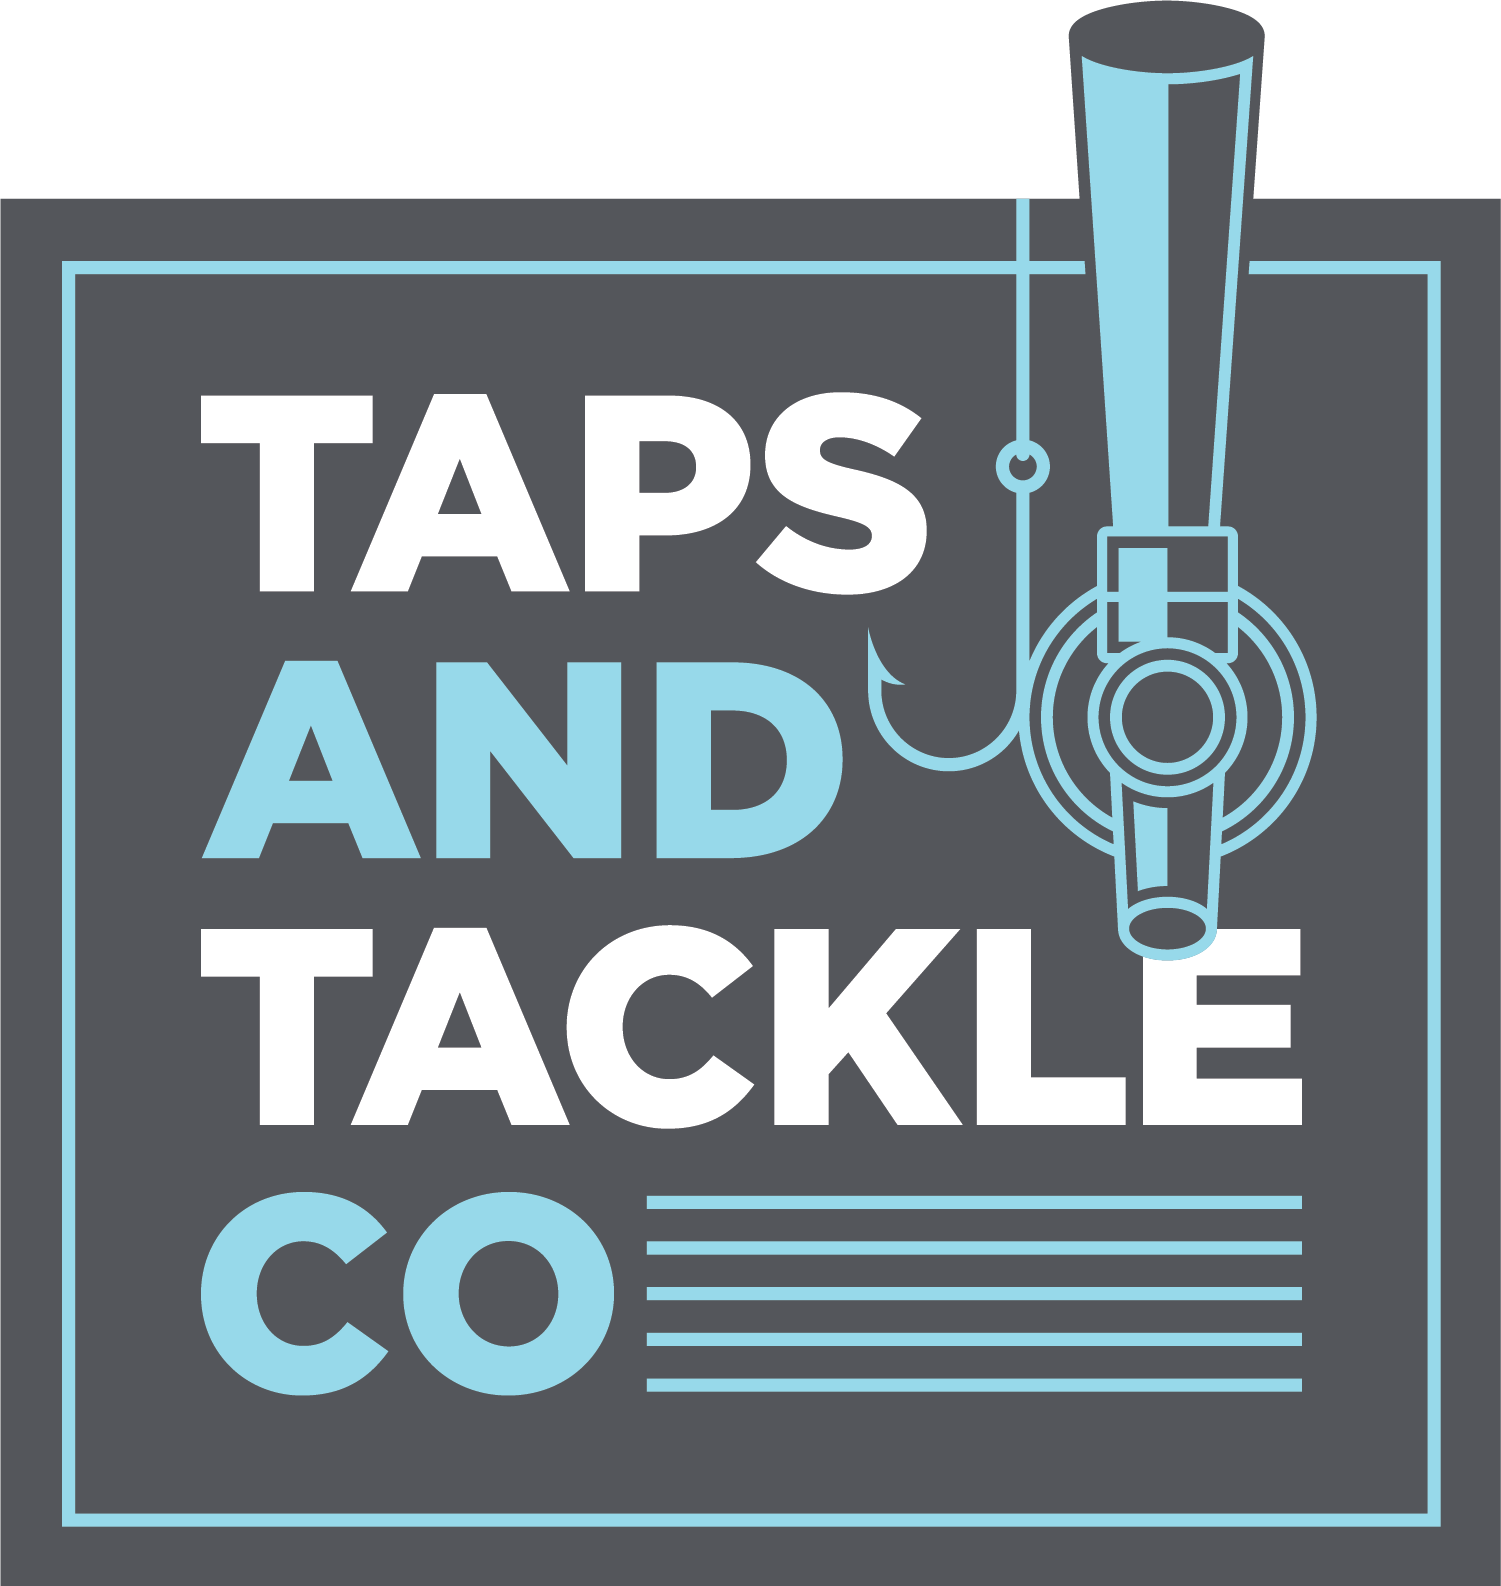 EX Bakers – Taps and Tackle Co.